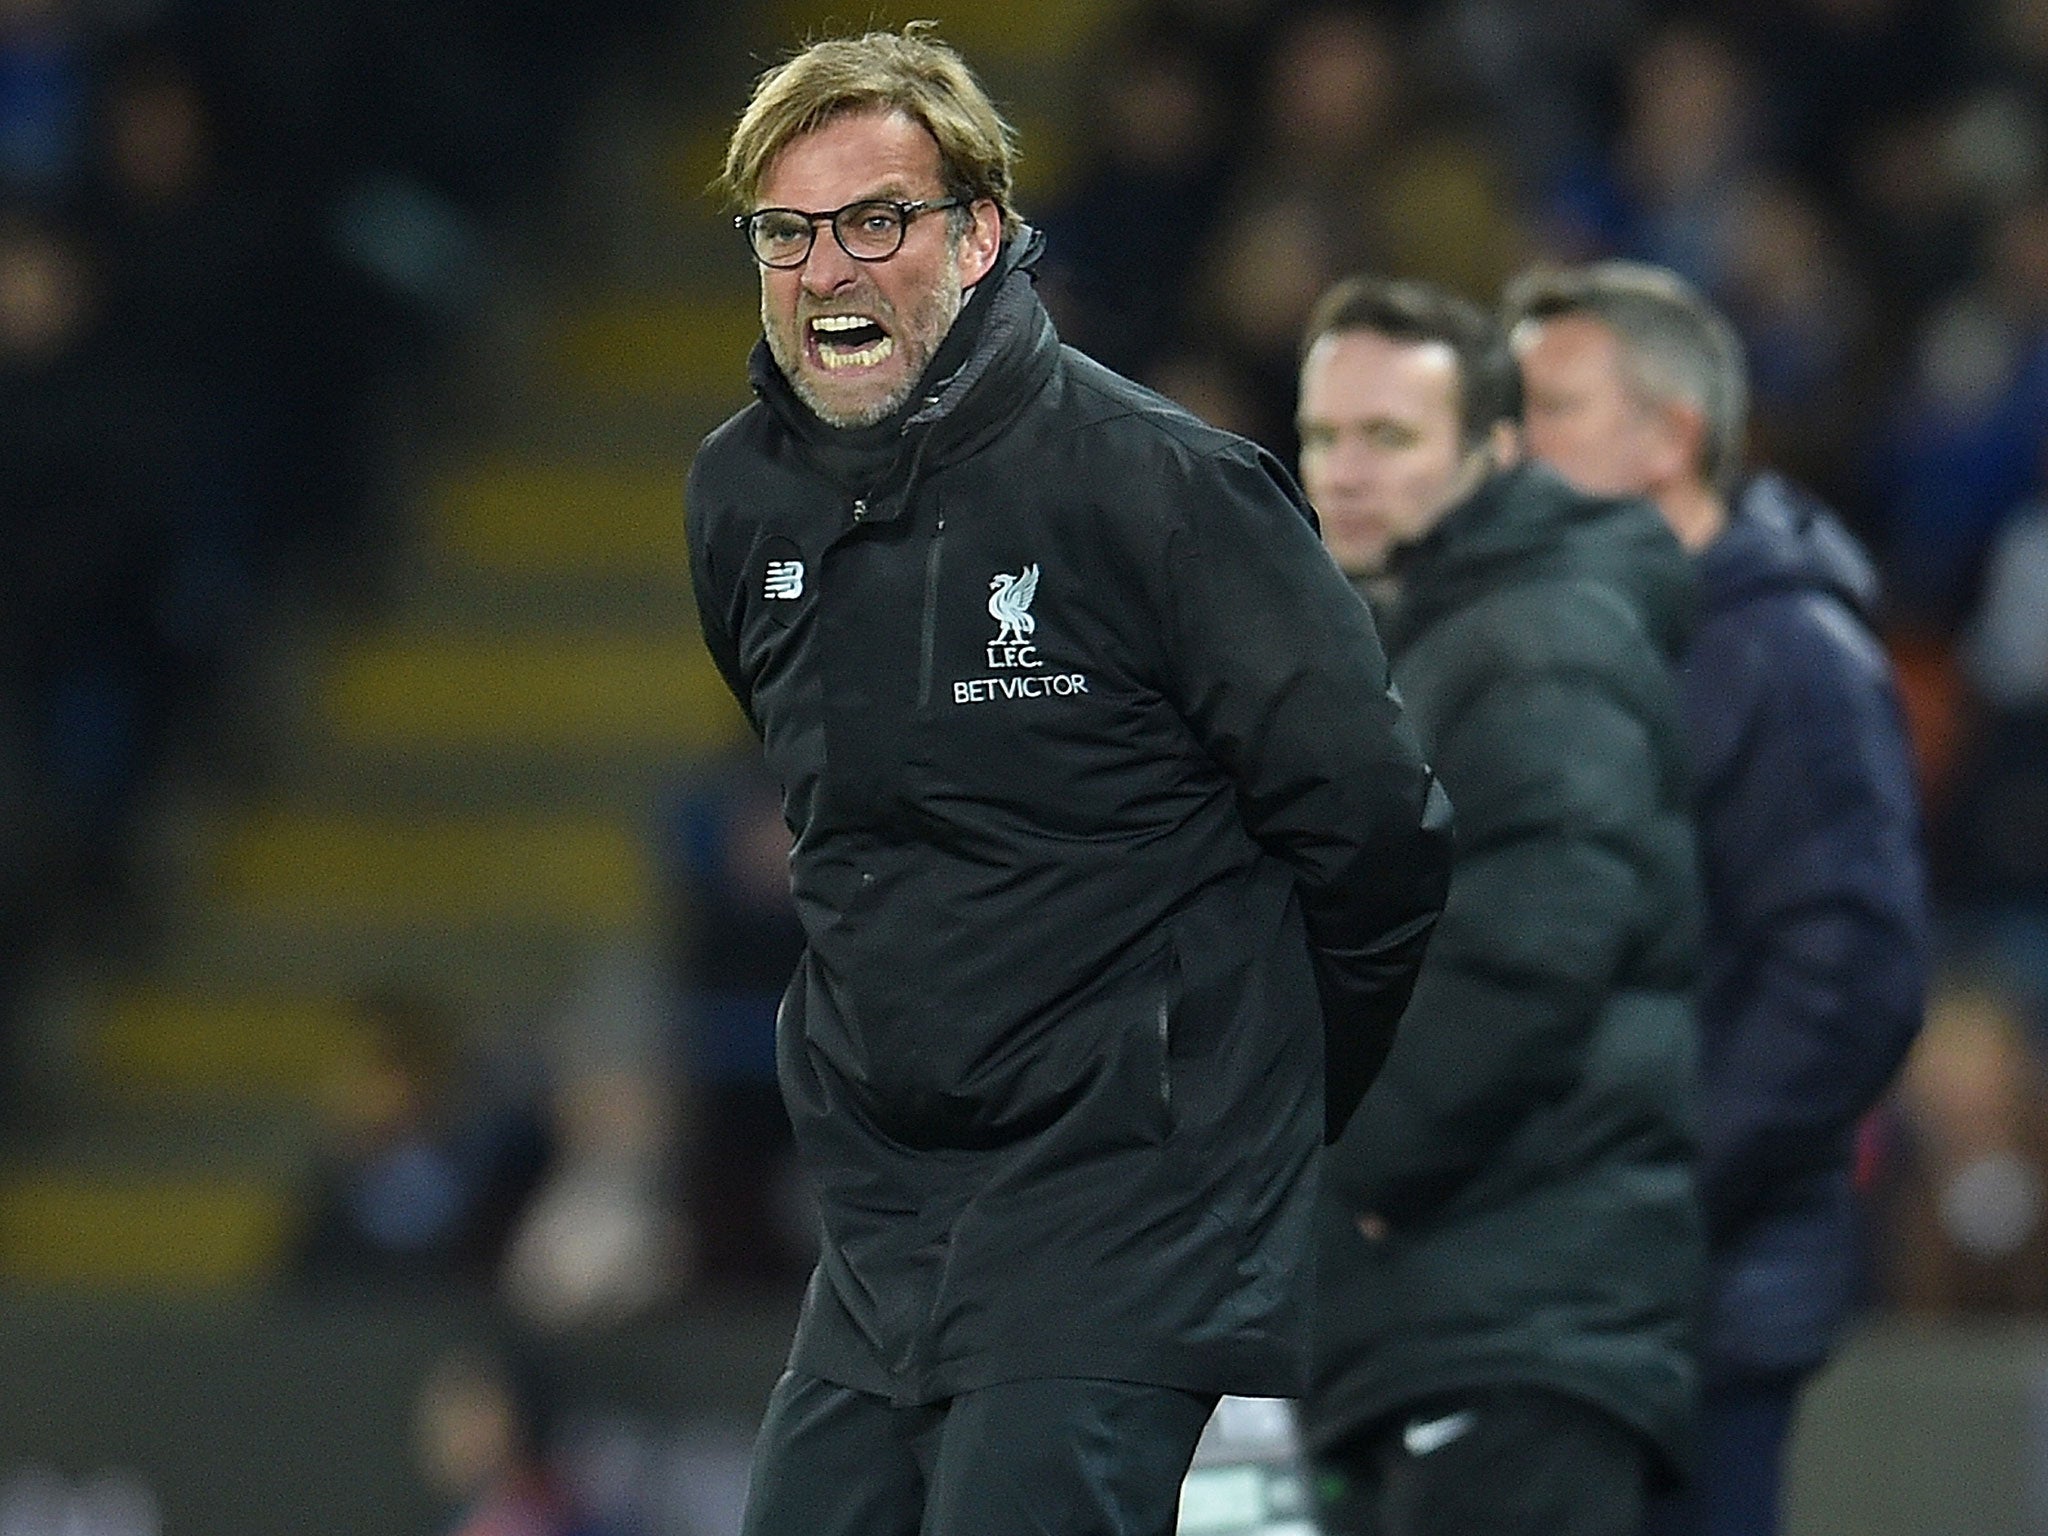 Jurgen Klopp is beginning to feel the pressure at Liverpool after their latest defeat